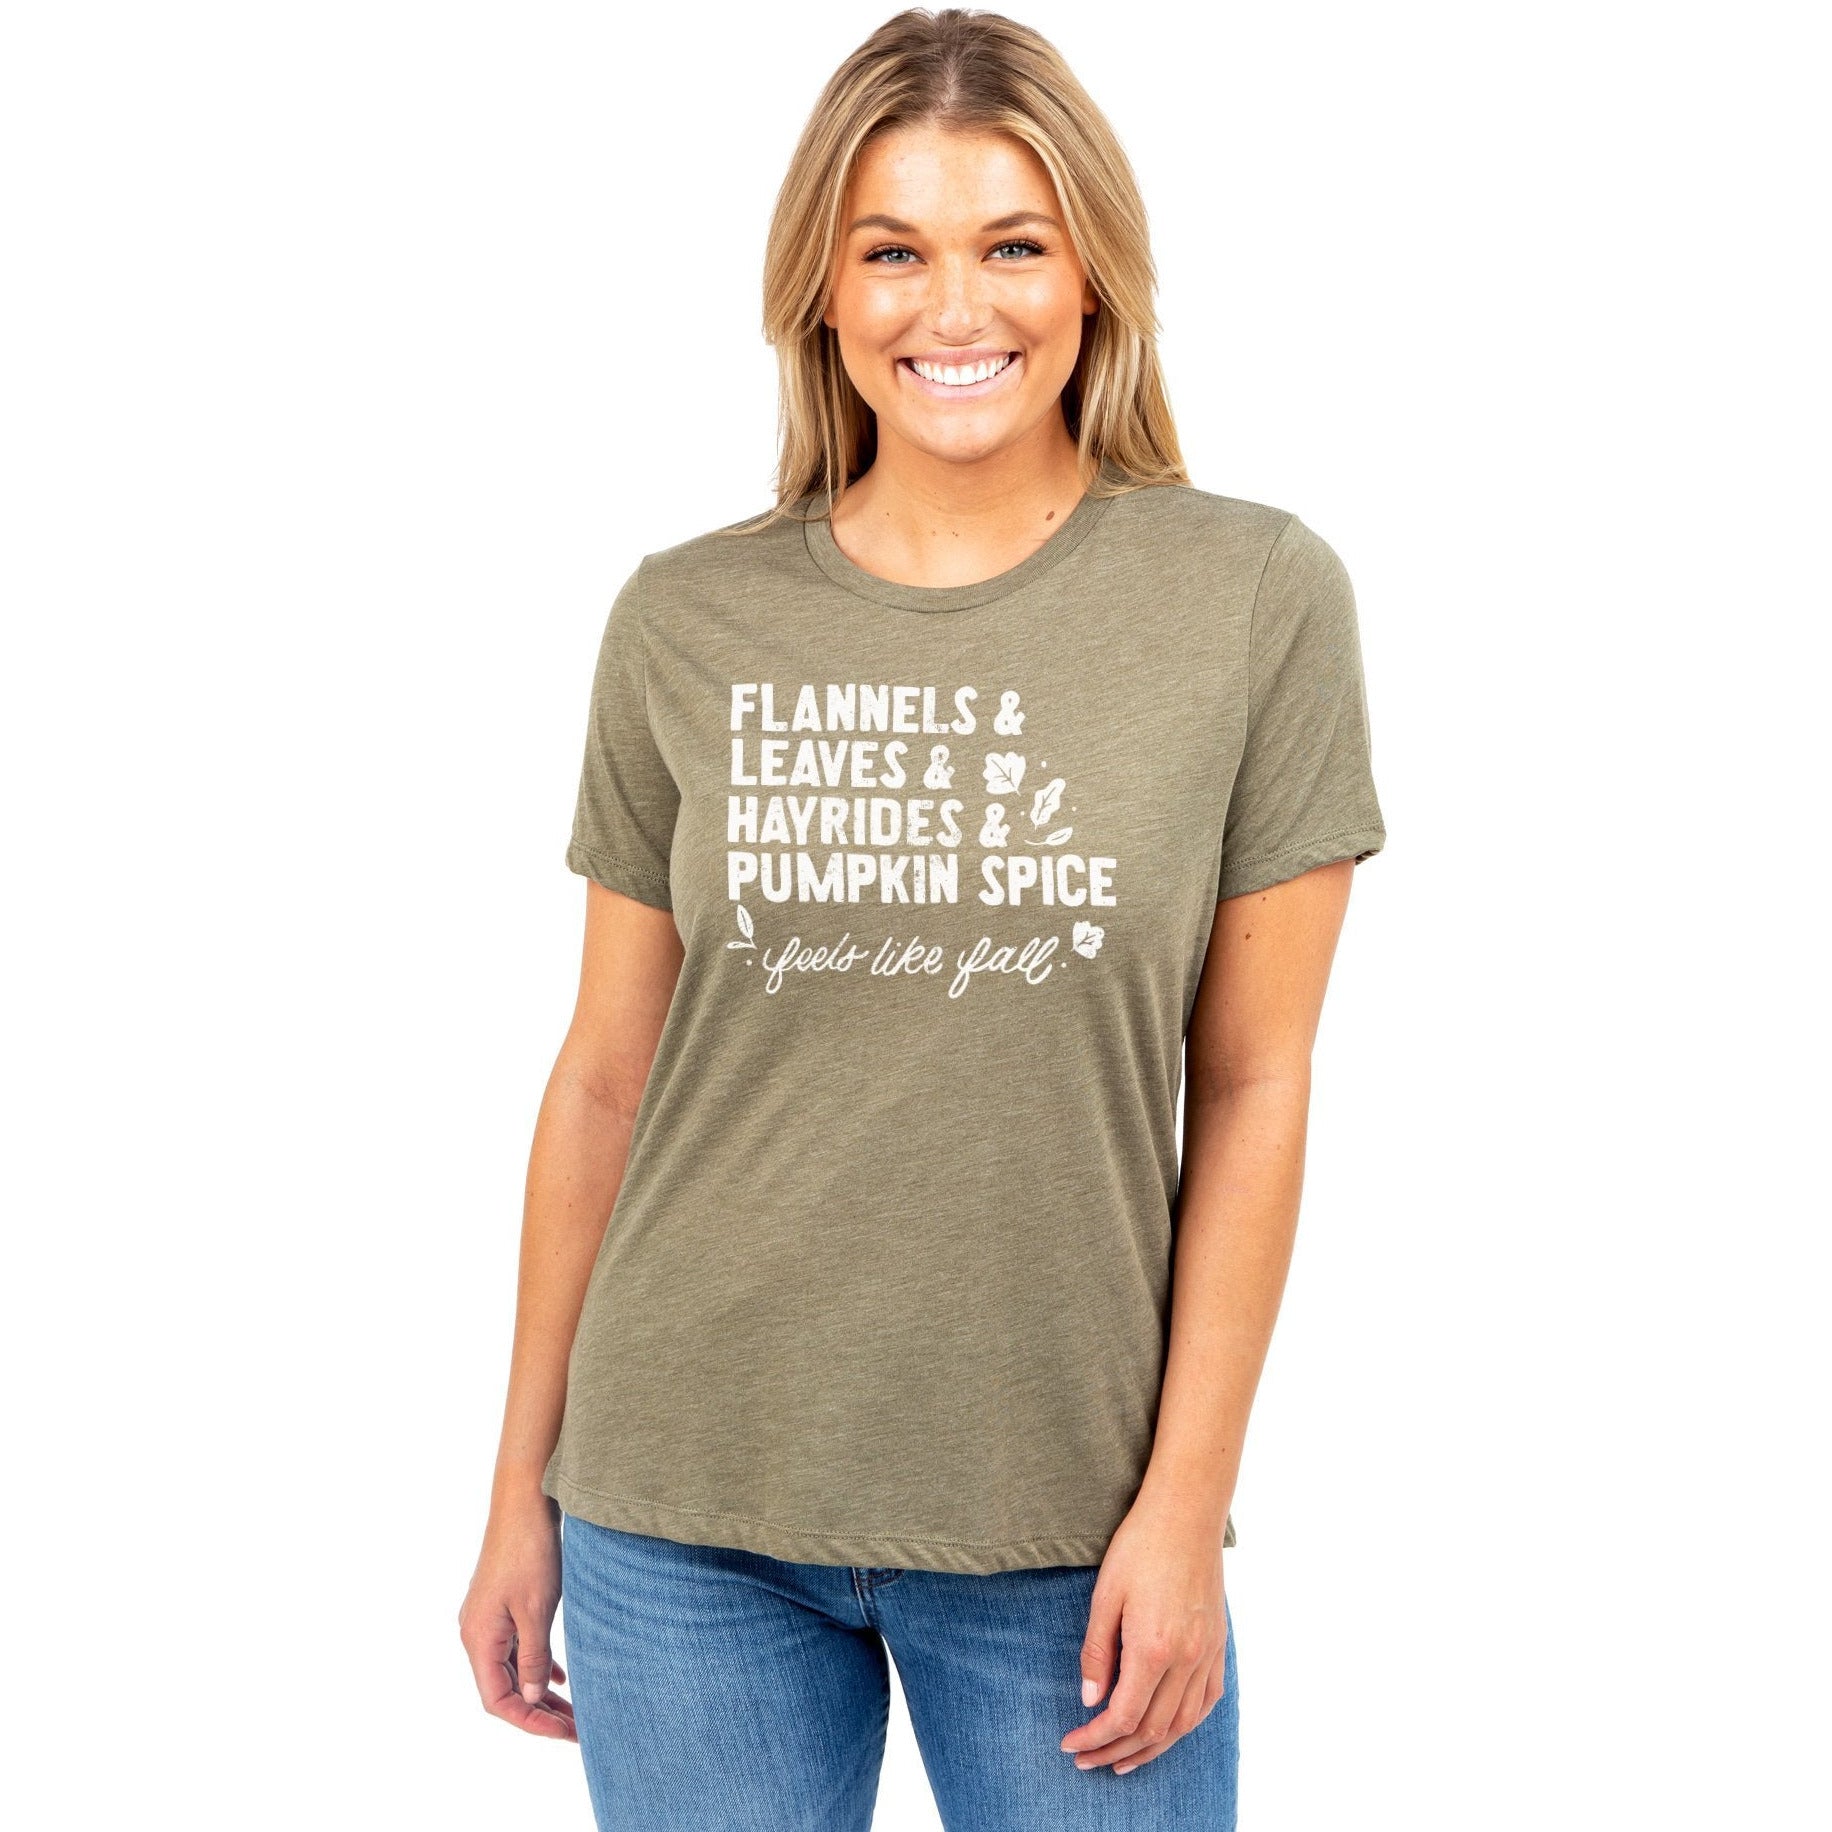 Flannels & Leaves & Hayrides & Pumpkin Spice...Feels like Fall Women's Relaxed Crewneck T-Shirt Top Tee Heather Sage Model
